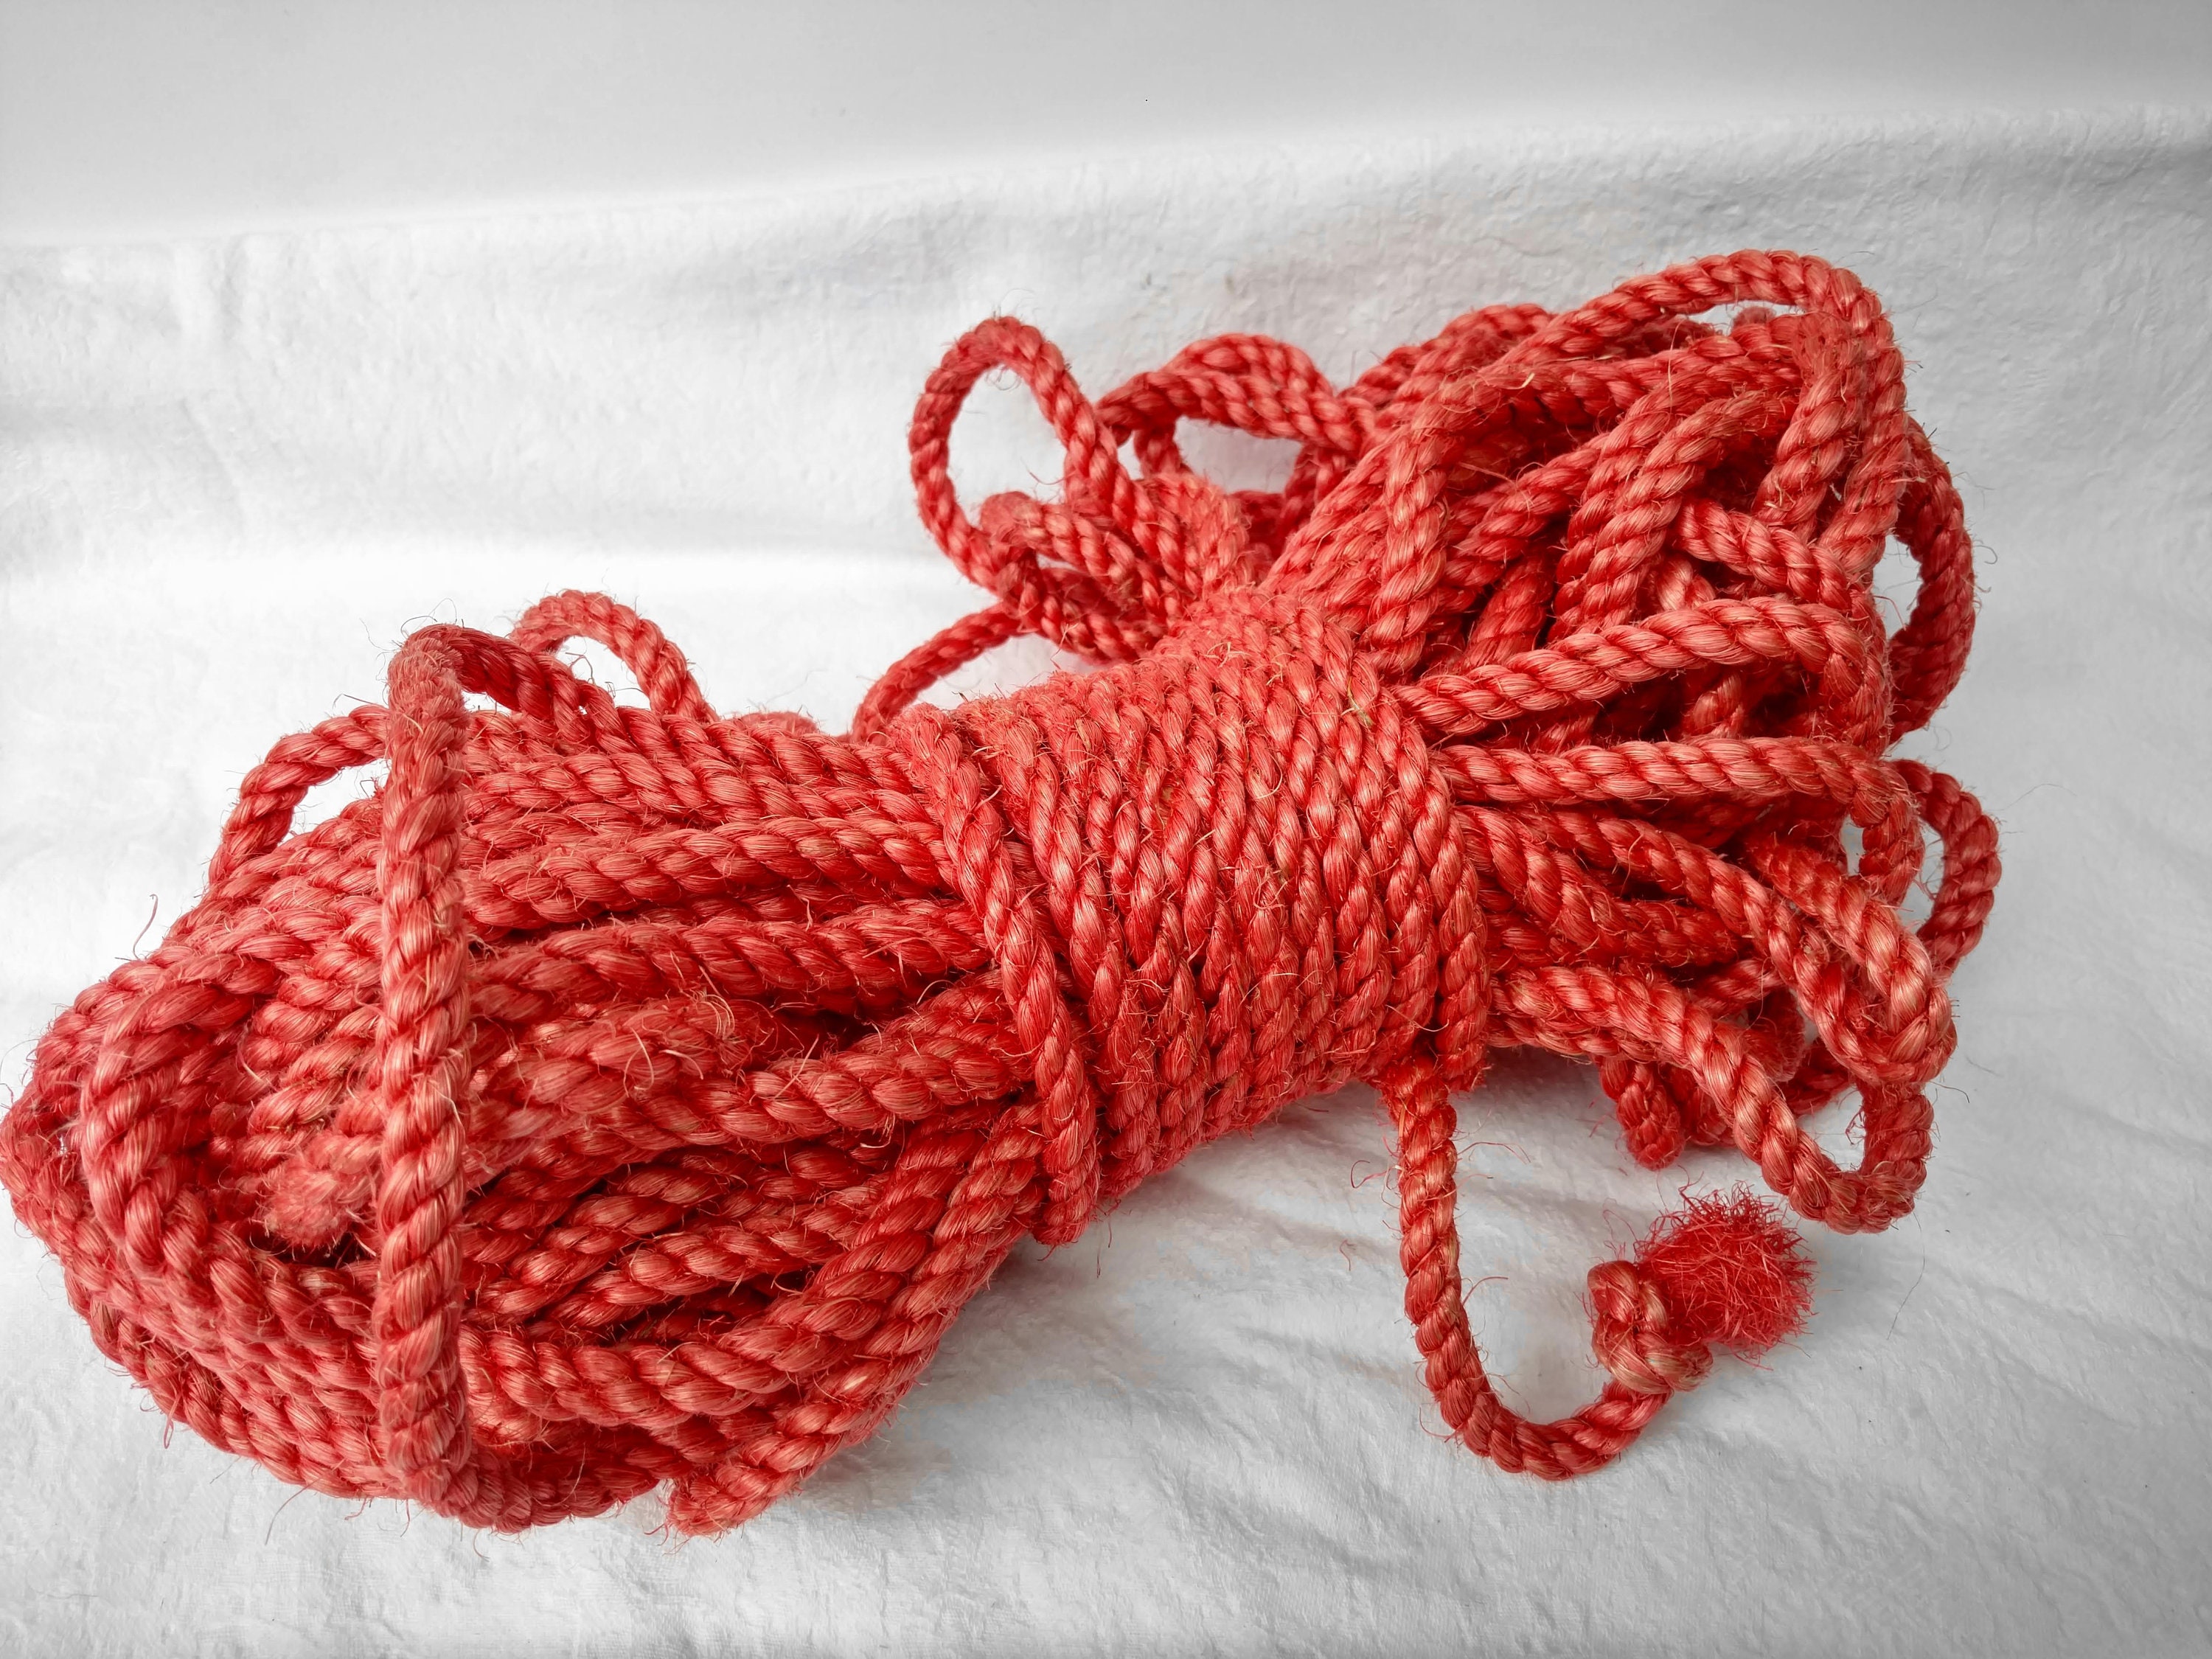 Coral Sisal Rope, Dyed Coral Pink Color: 1/4, 5/16, 3/8 or 1/2